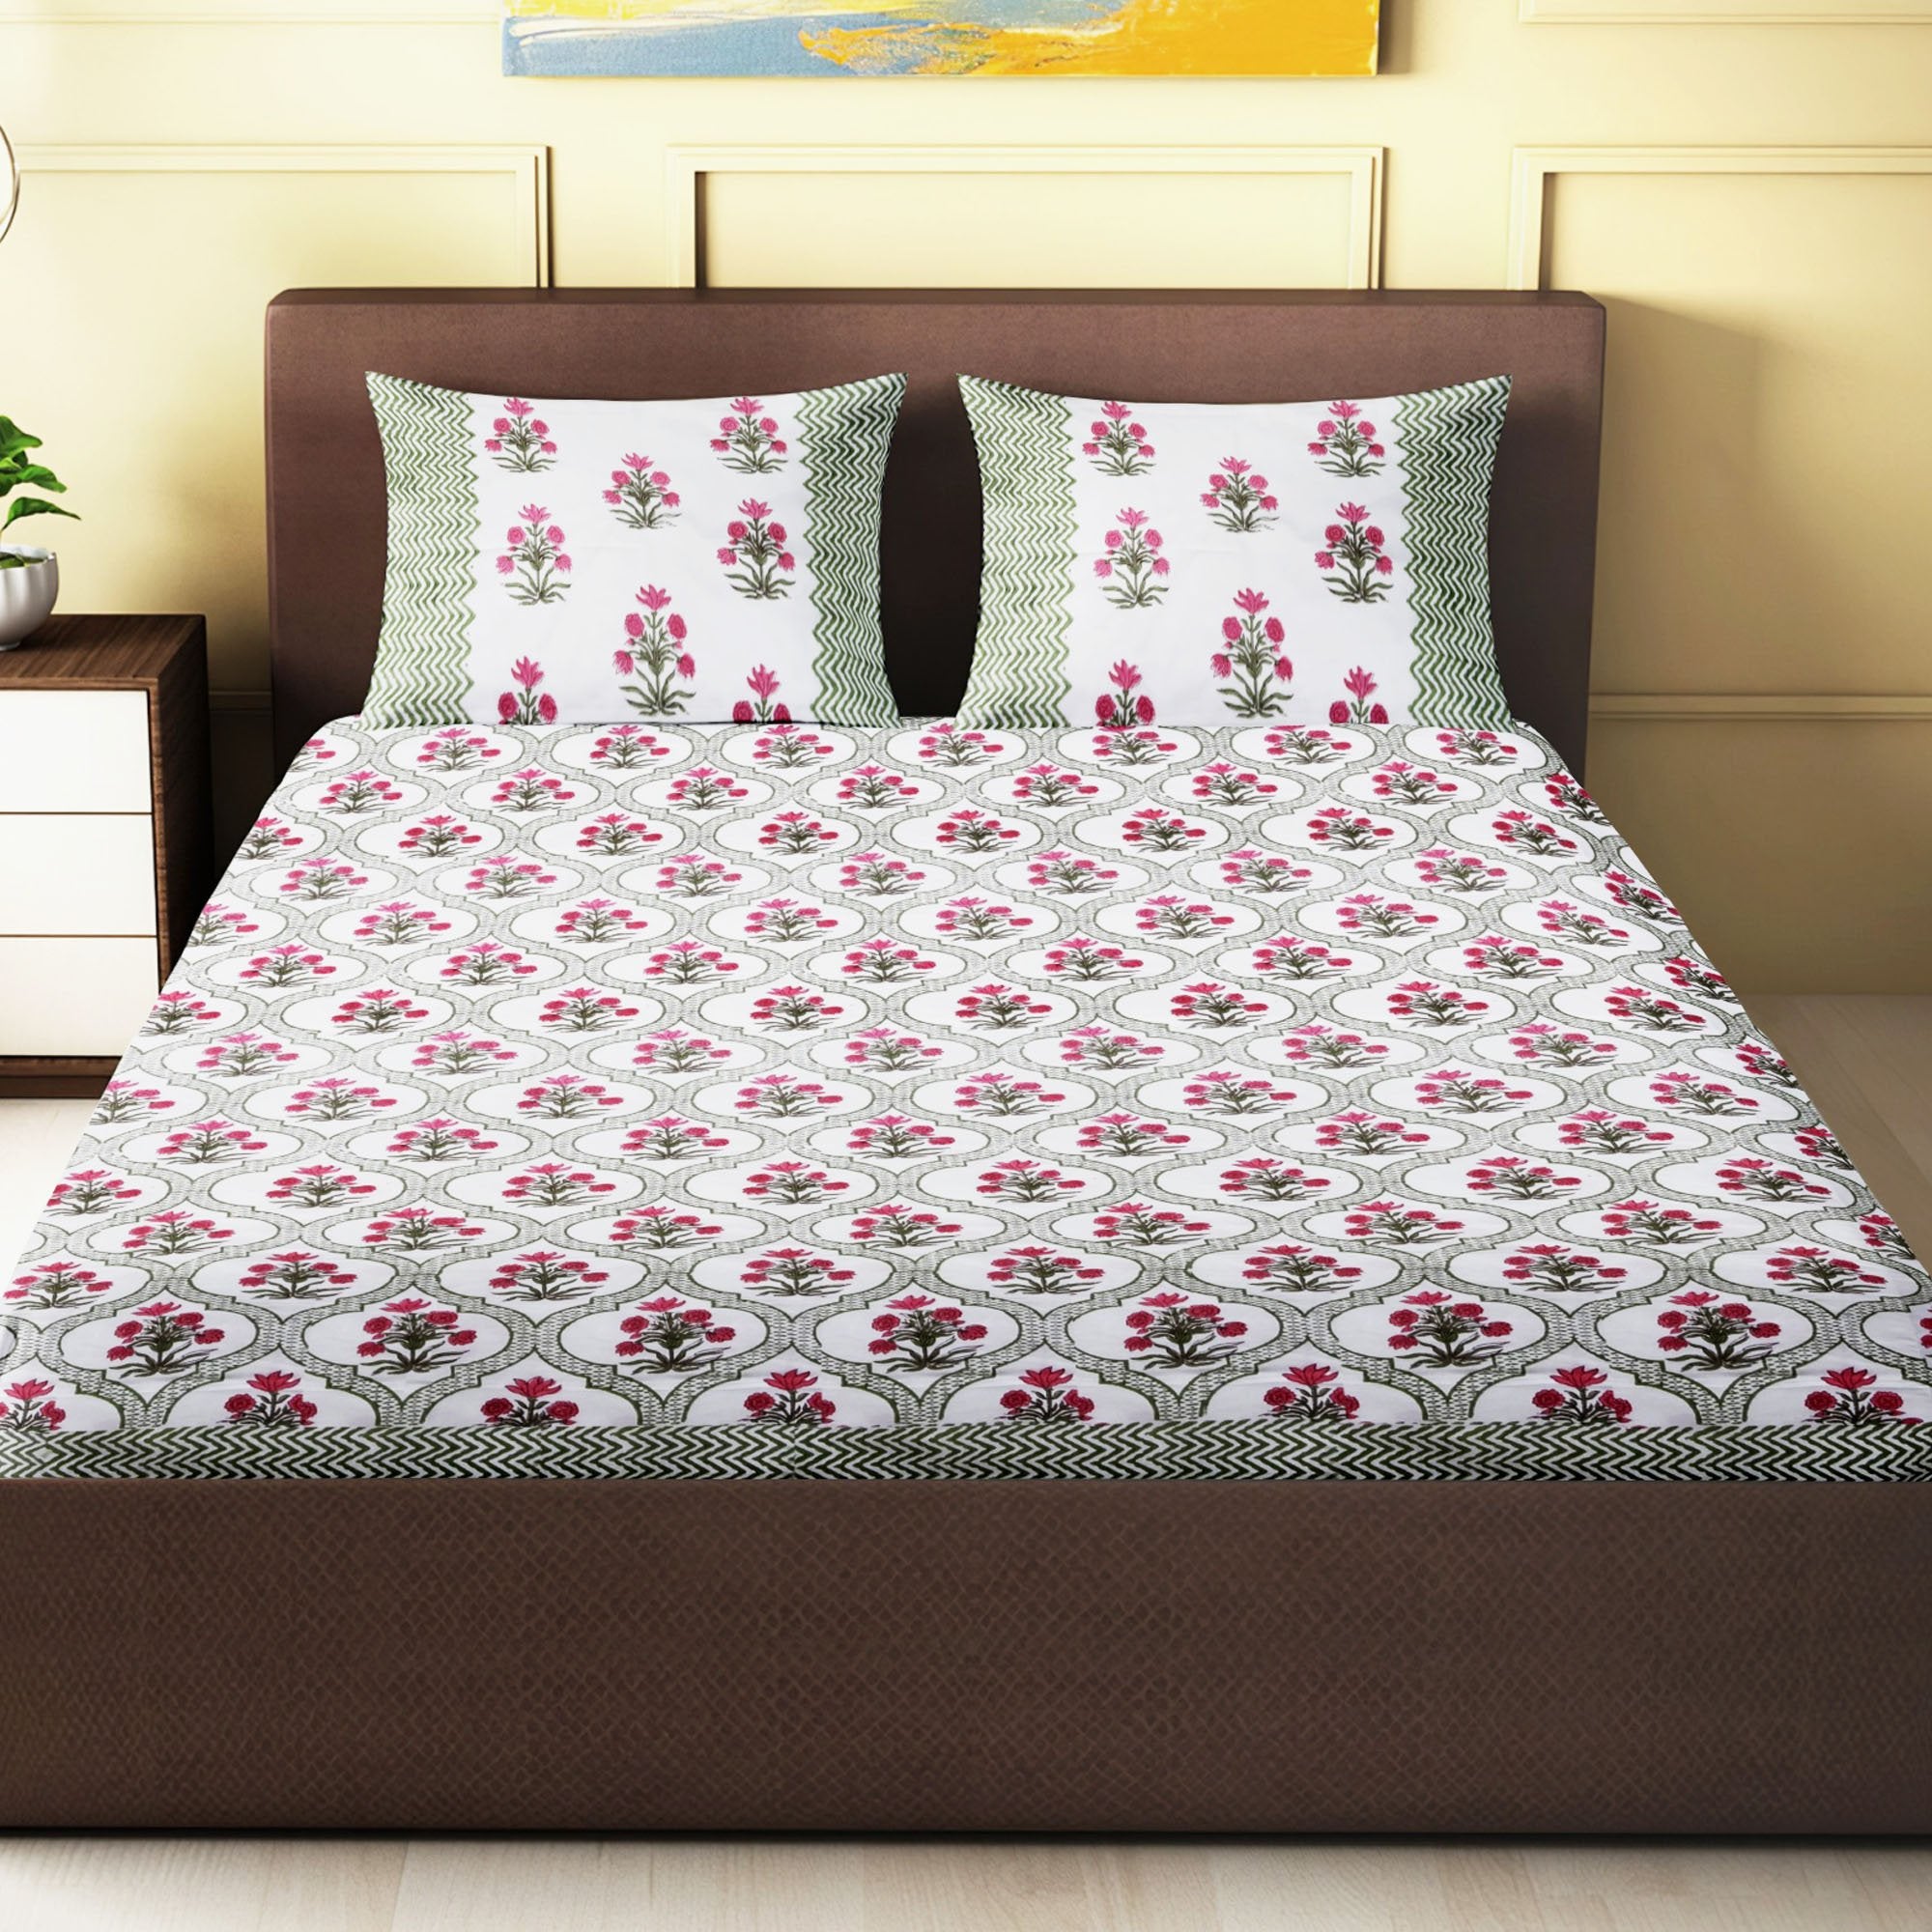 100% Handmade  Ethnic pattern sanganeri Block Print King Size Bedsheets comes  with 2 Pillow covers